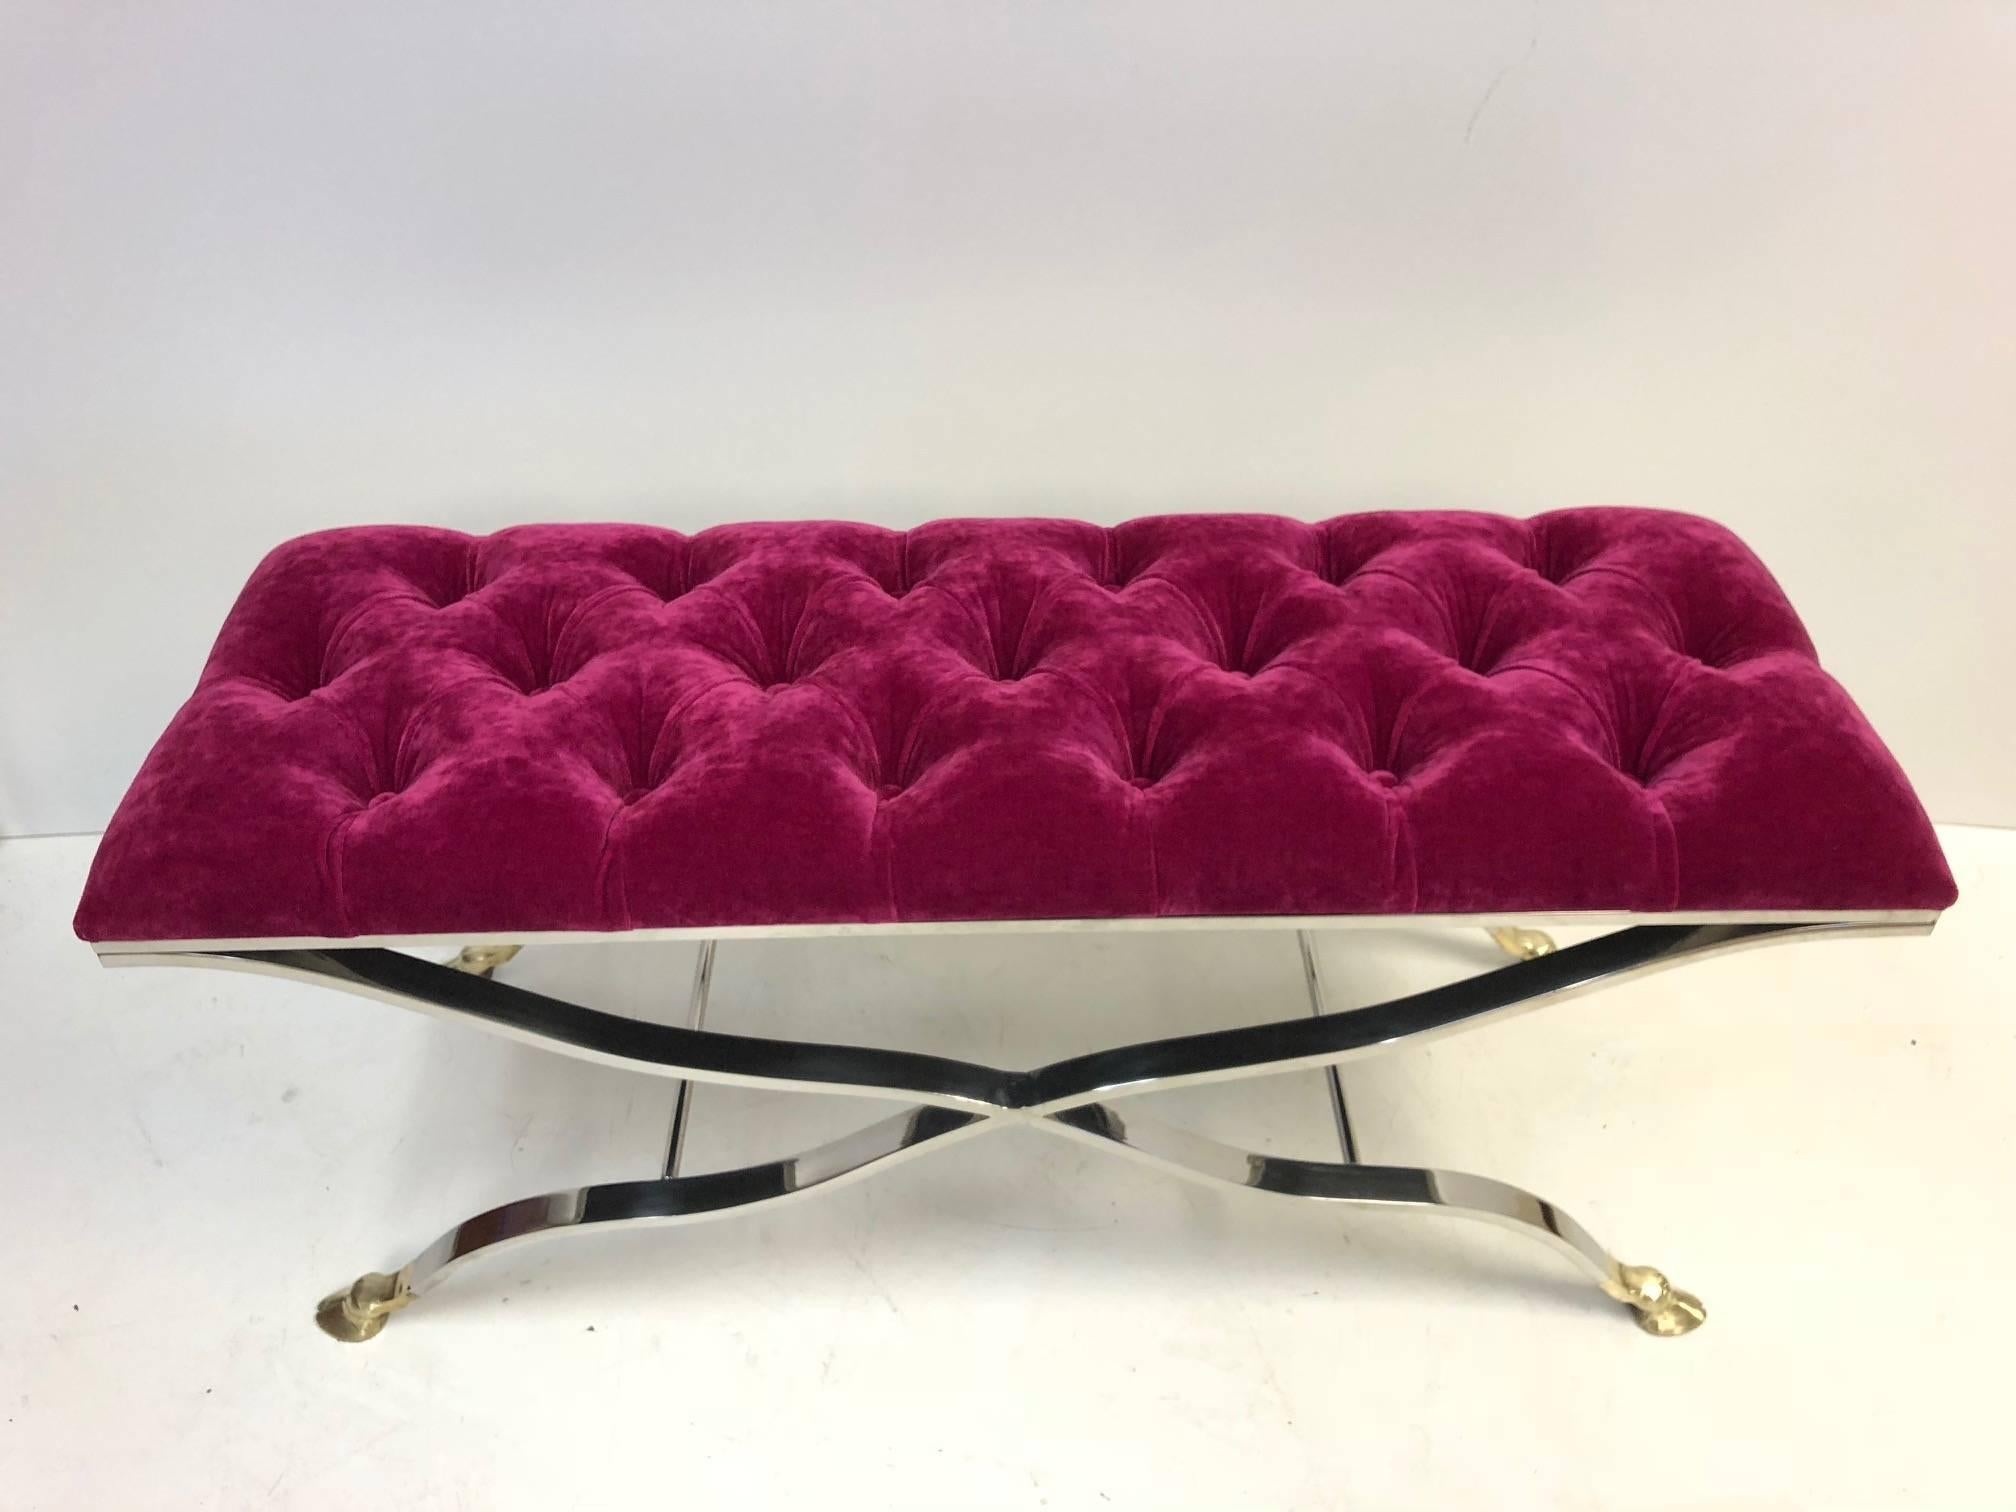 Directoire Maison Baguès Iron and Bronze Tufted Mohair Fabric Bench For Sale